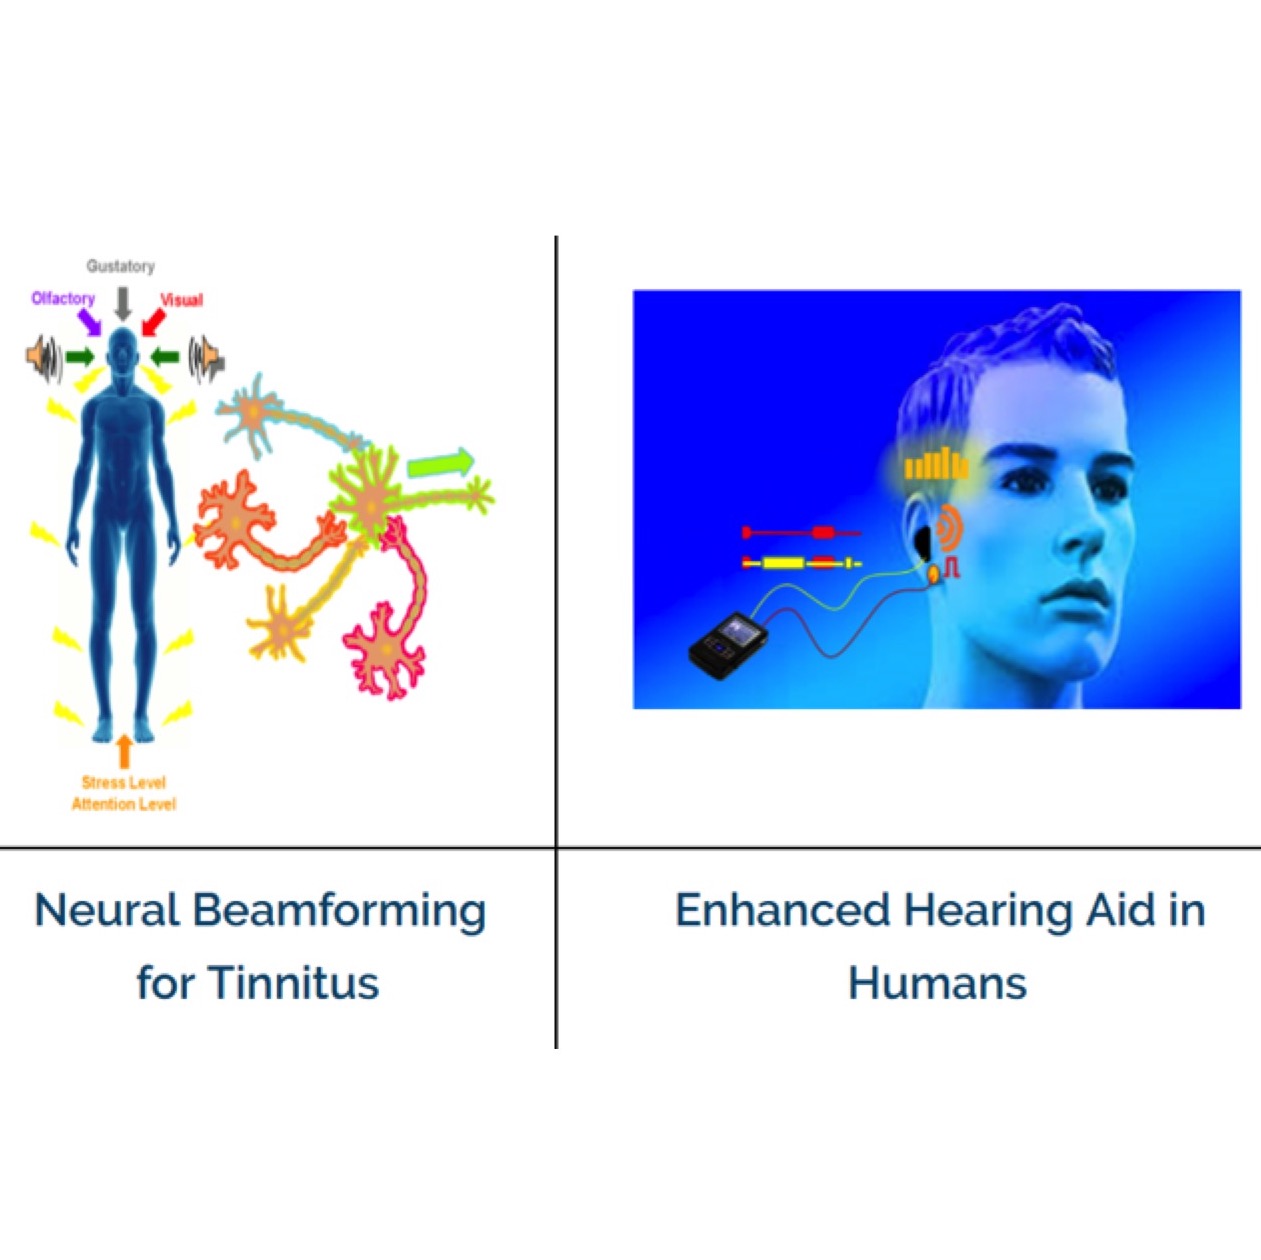 Graphical renderings of two technologies: 1) Neural beamforming for tinnitus (shows person with arrows indicating input of stress level, attention level, offactory, gustatory, visual, sound), and 2) Enhanced hearing aid in humans (shows rendering of a man's head with electronic device connected to his ear)